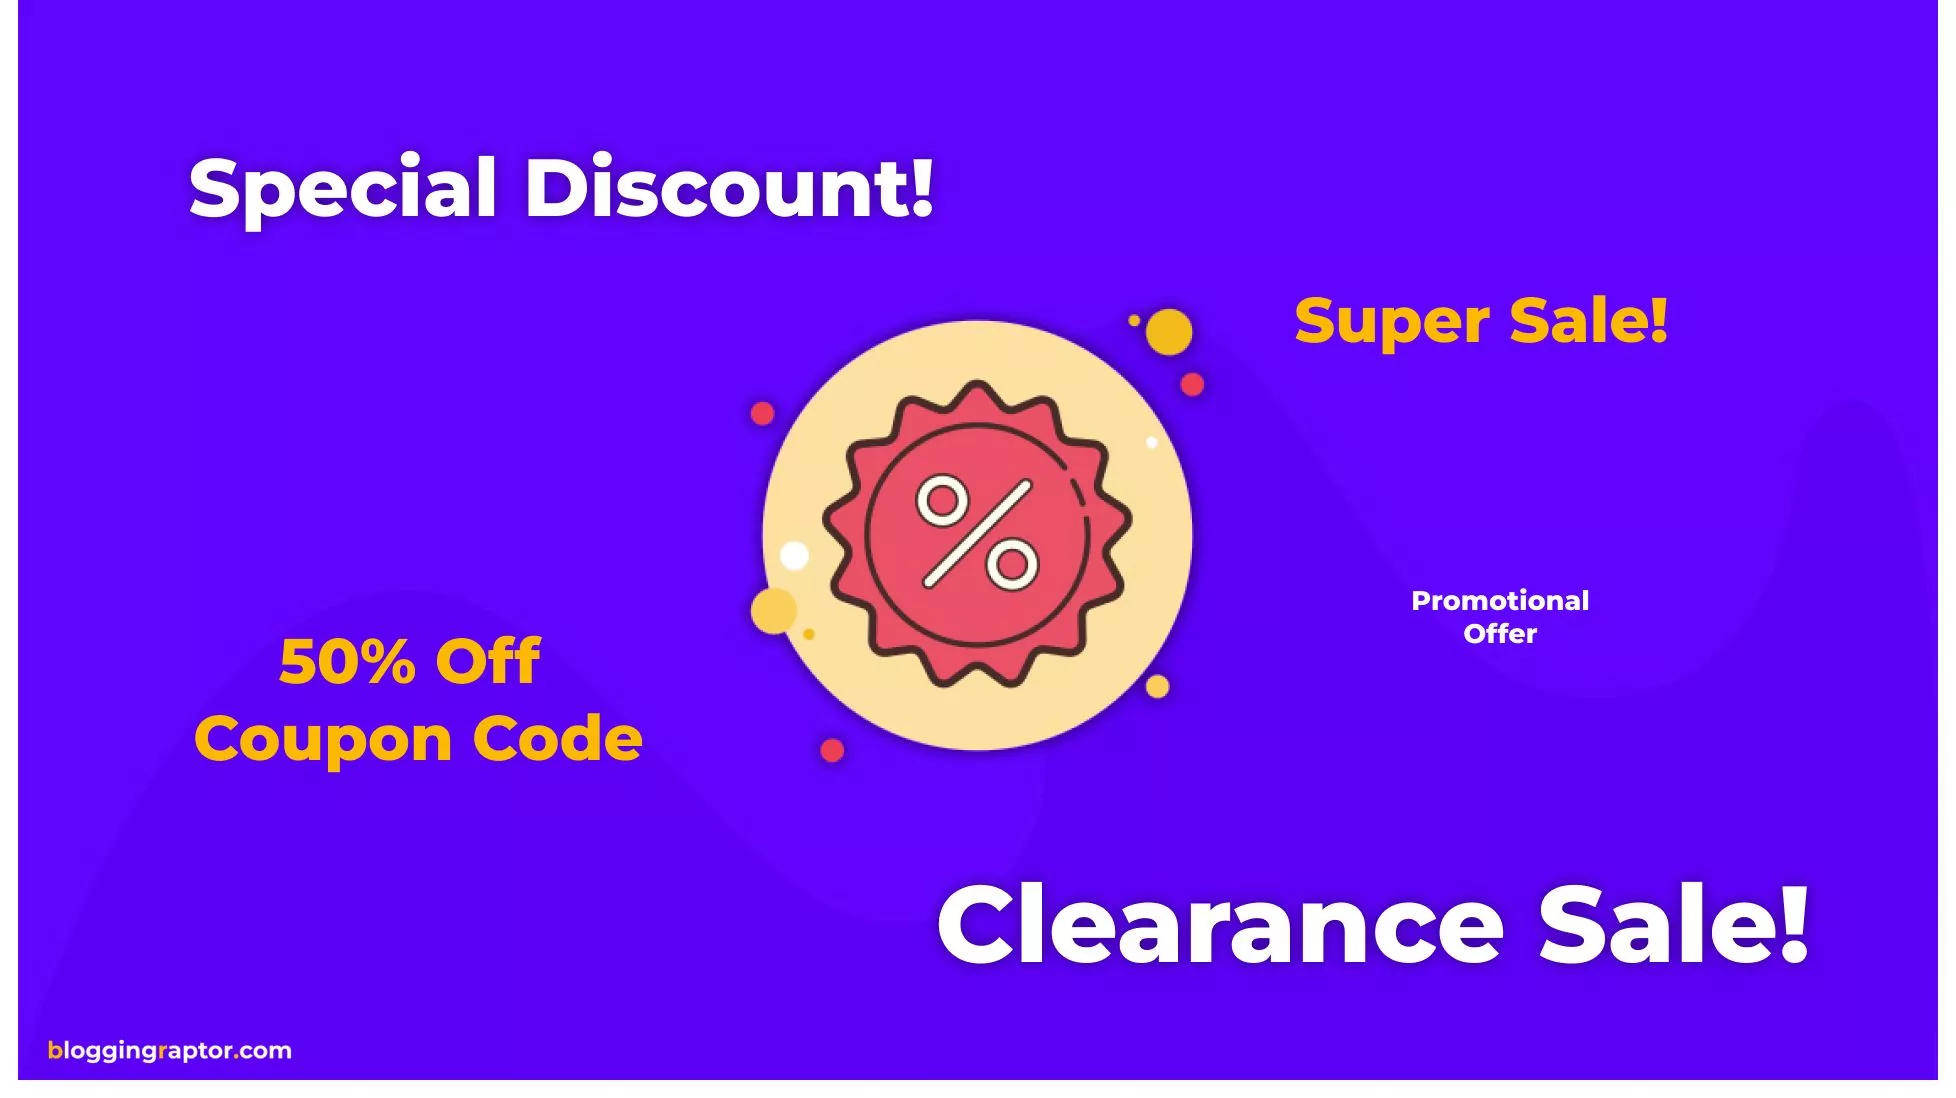 discounted-price-coupon-codes-sale